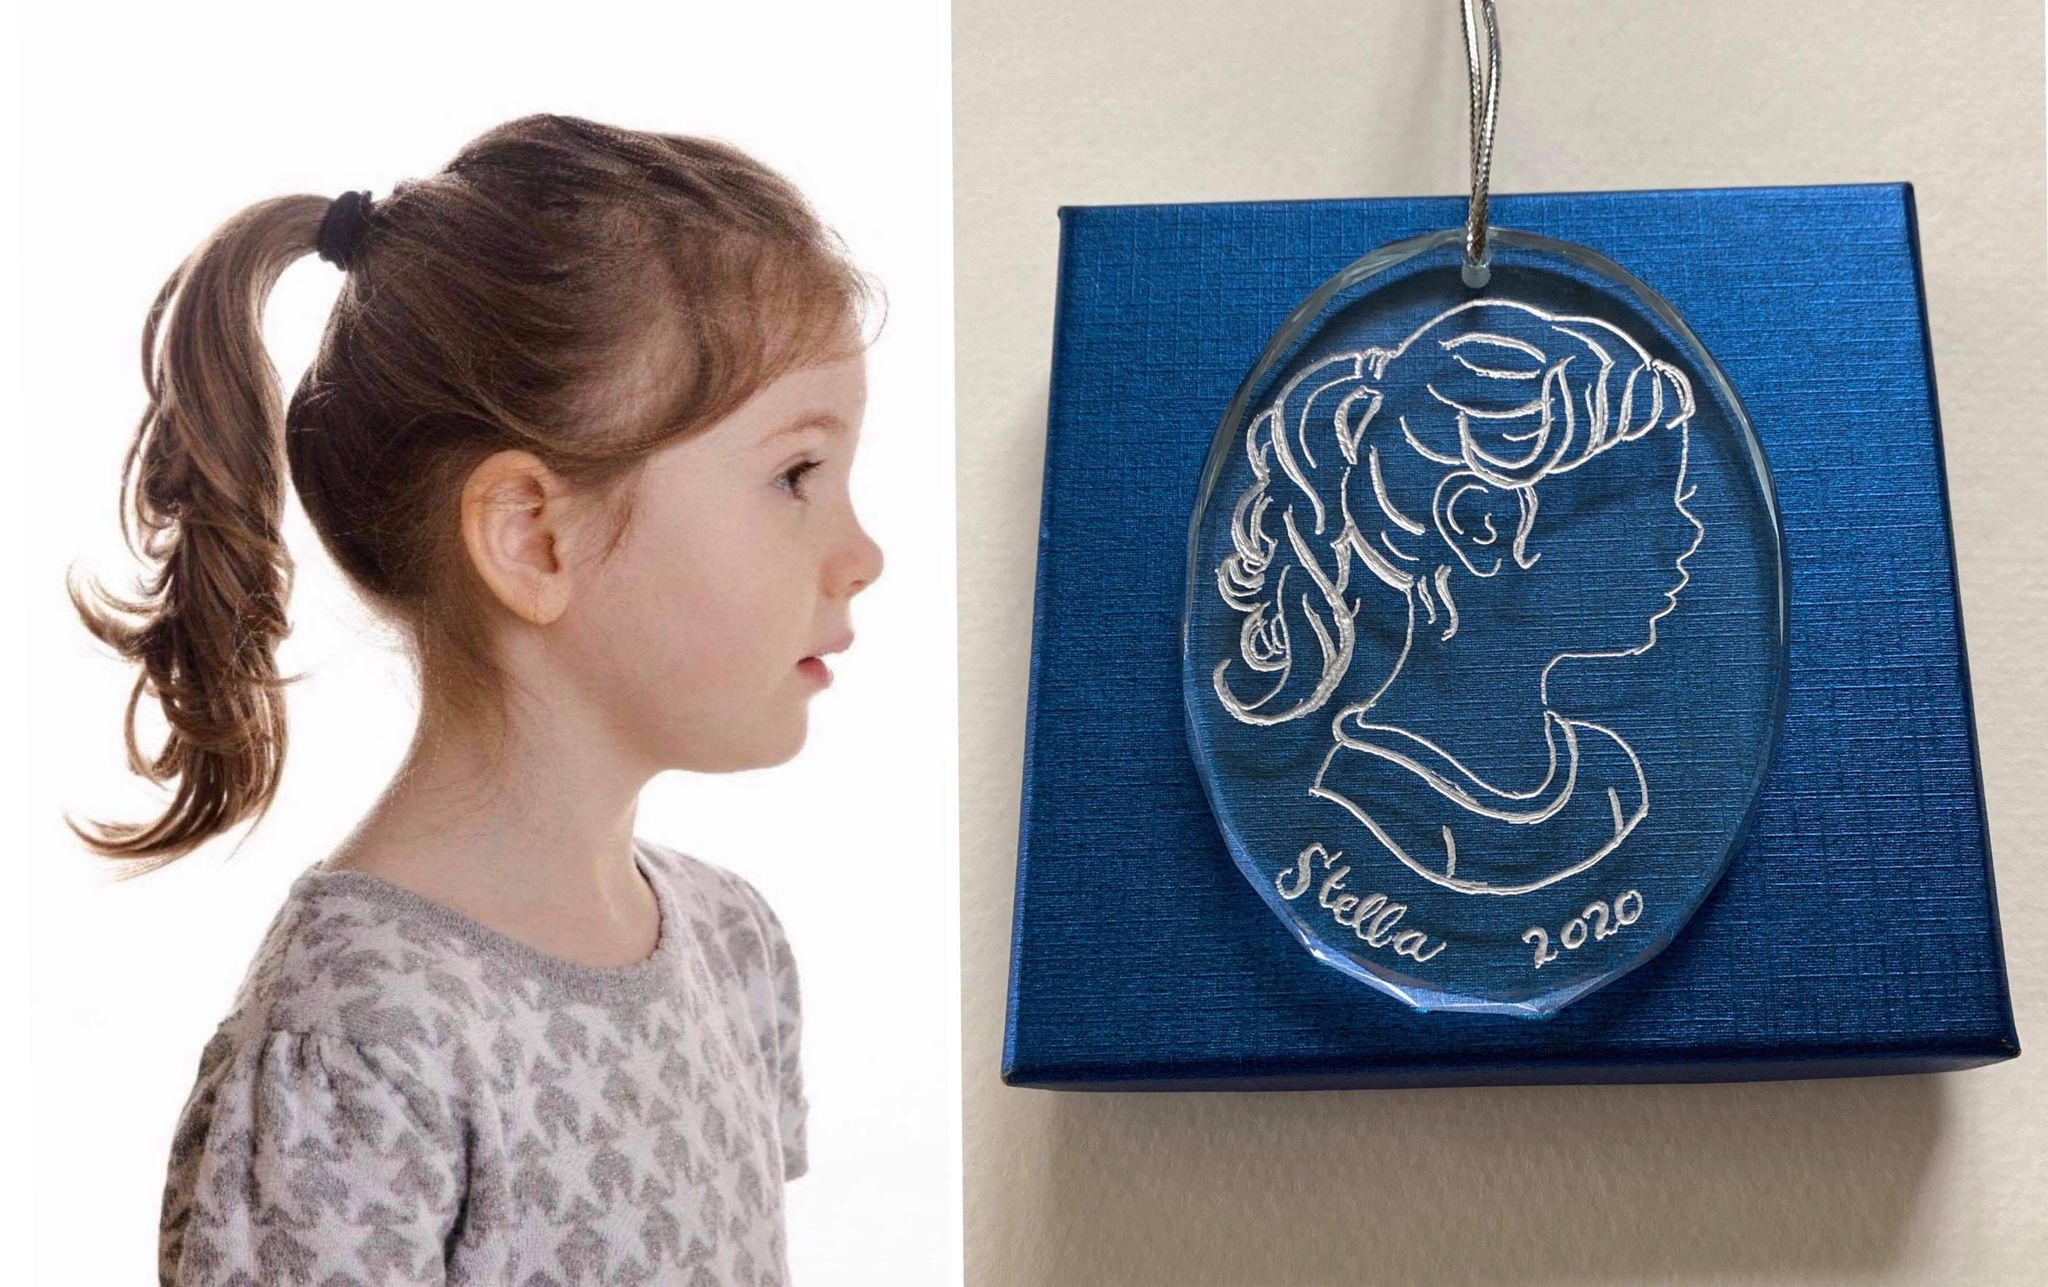 etched ornament of a girl